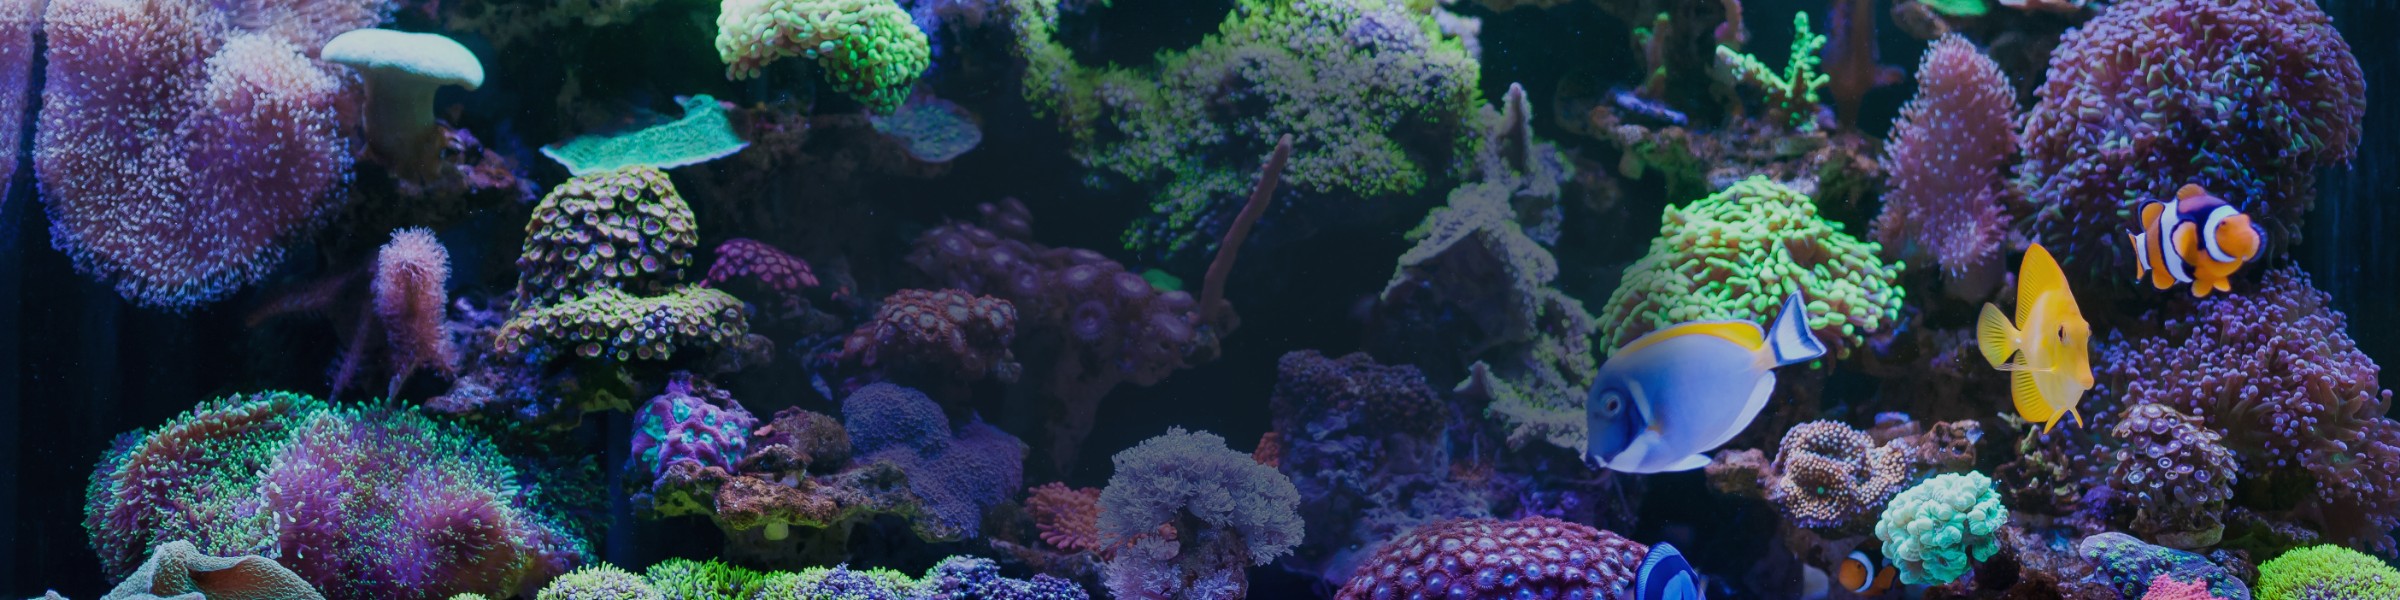 The Ultimate Coral Reef Tank Setup Checklist